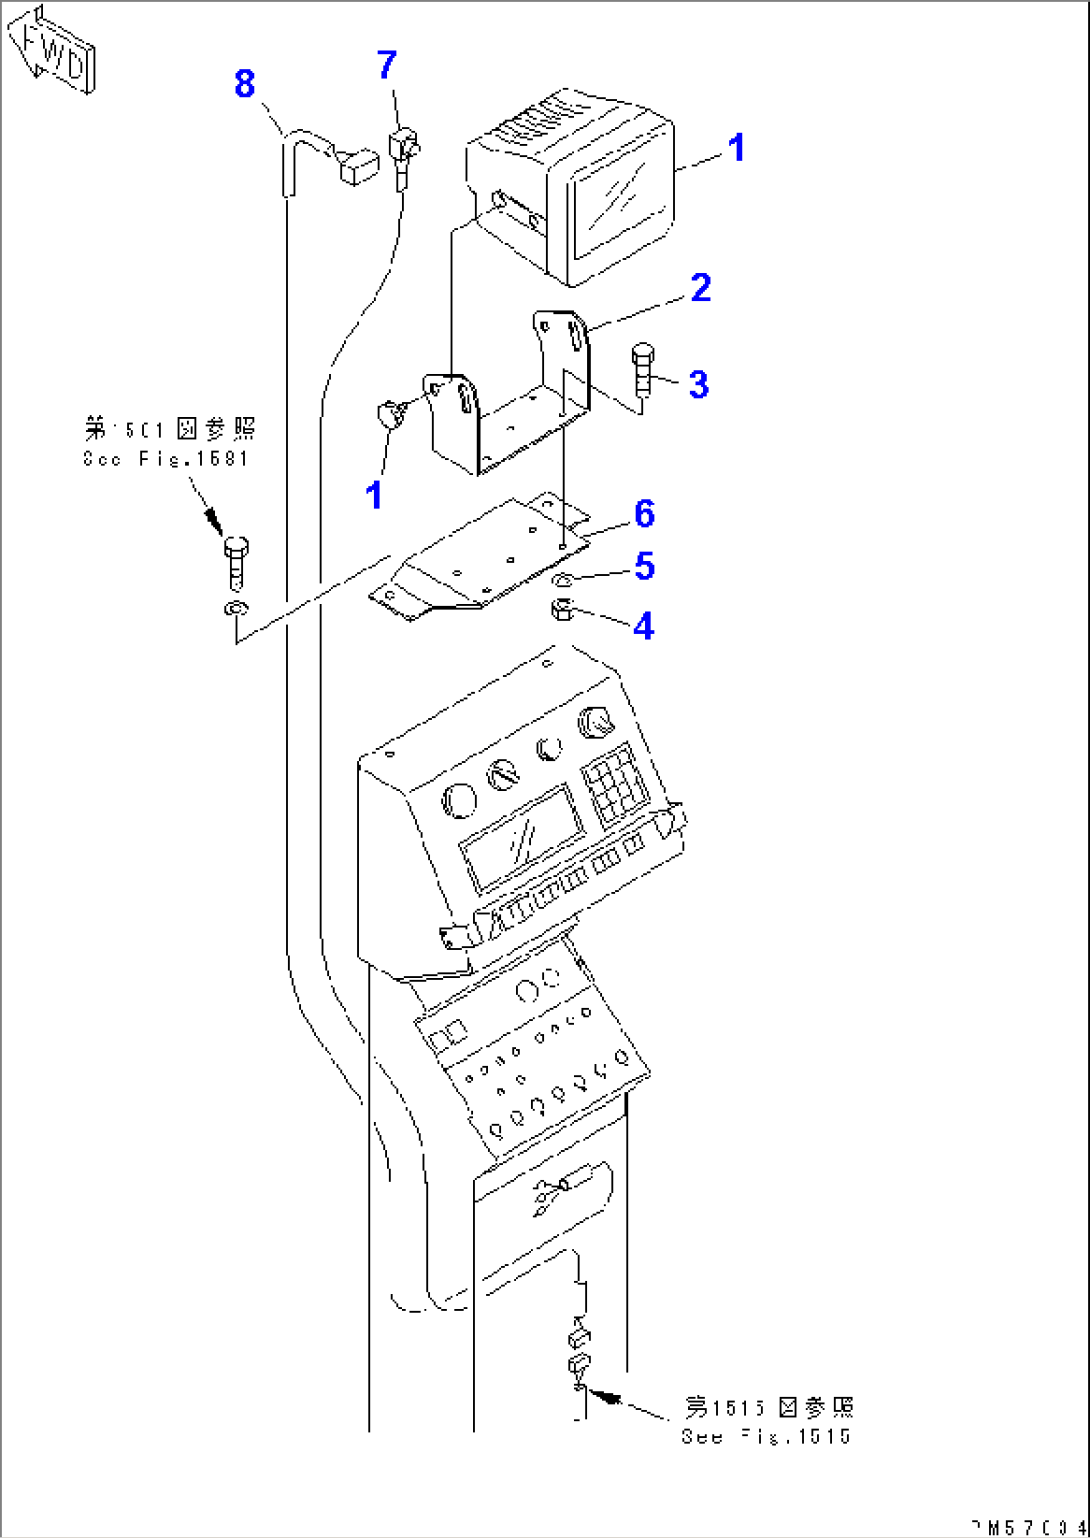 ELECTRICAL SYSTEM (REAR VIEW MONITOR) (WITH AUTOMATIC SPLINKLING SYSTEM)